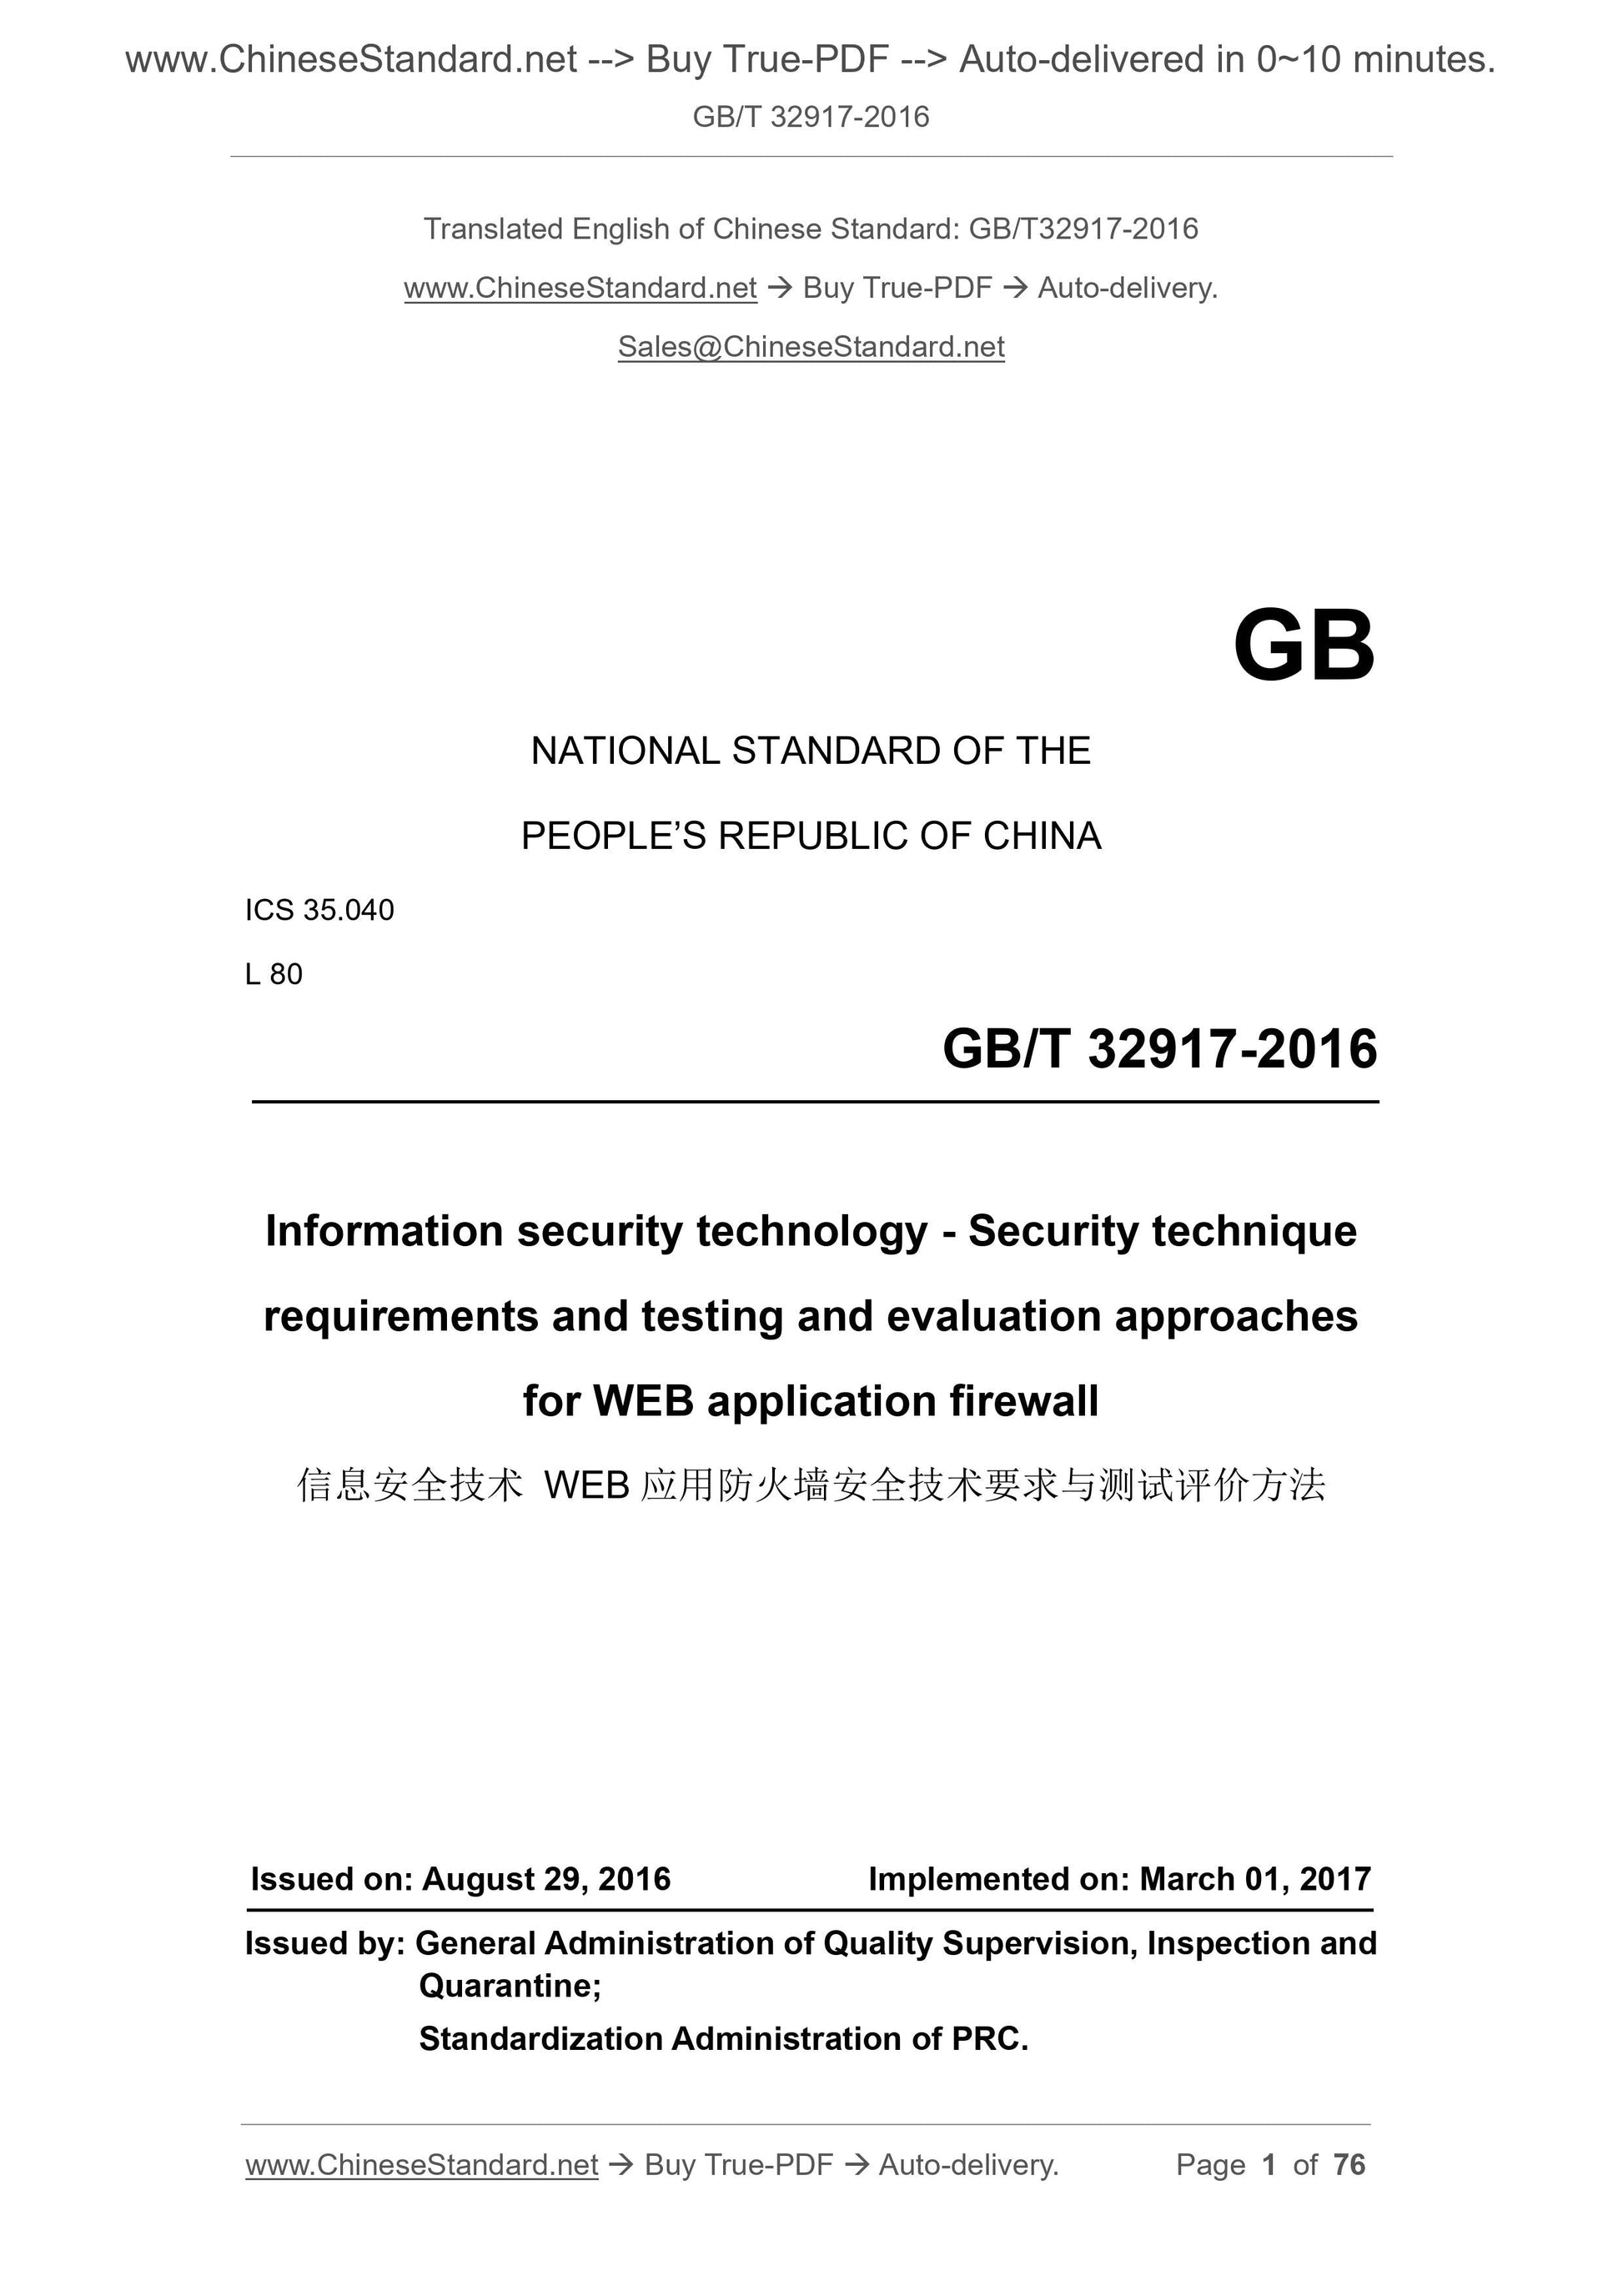 GB/T 32917-2016 Page 1